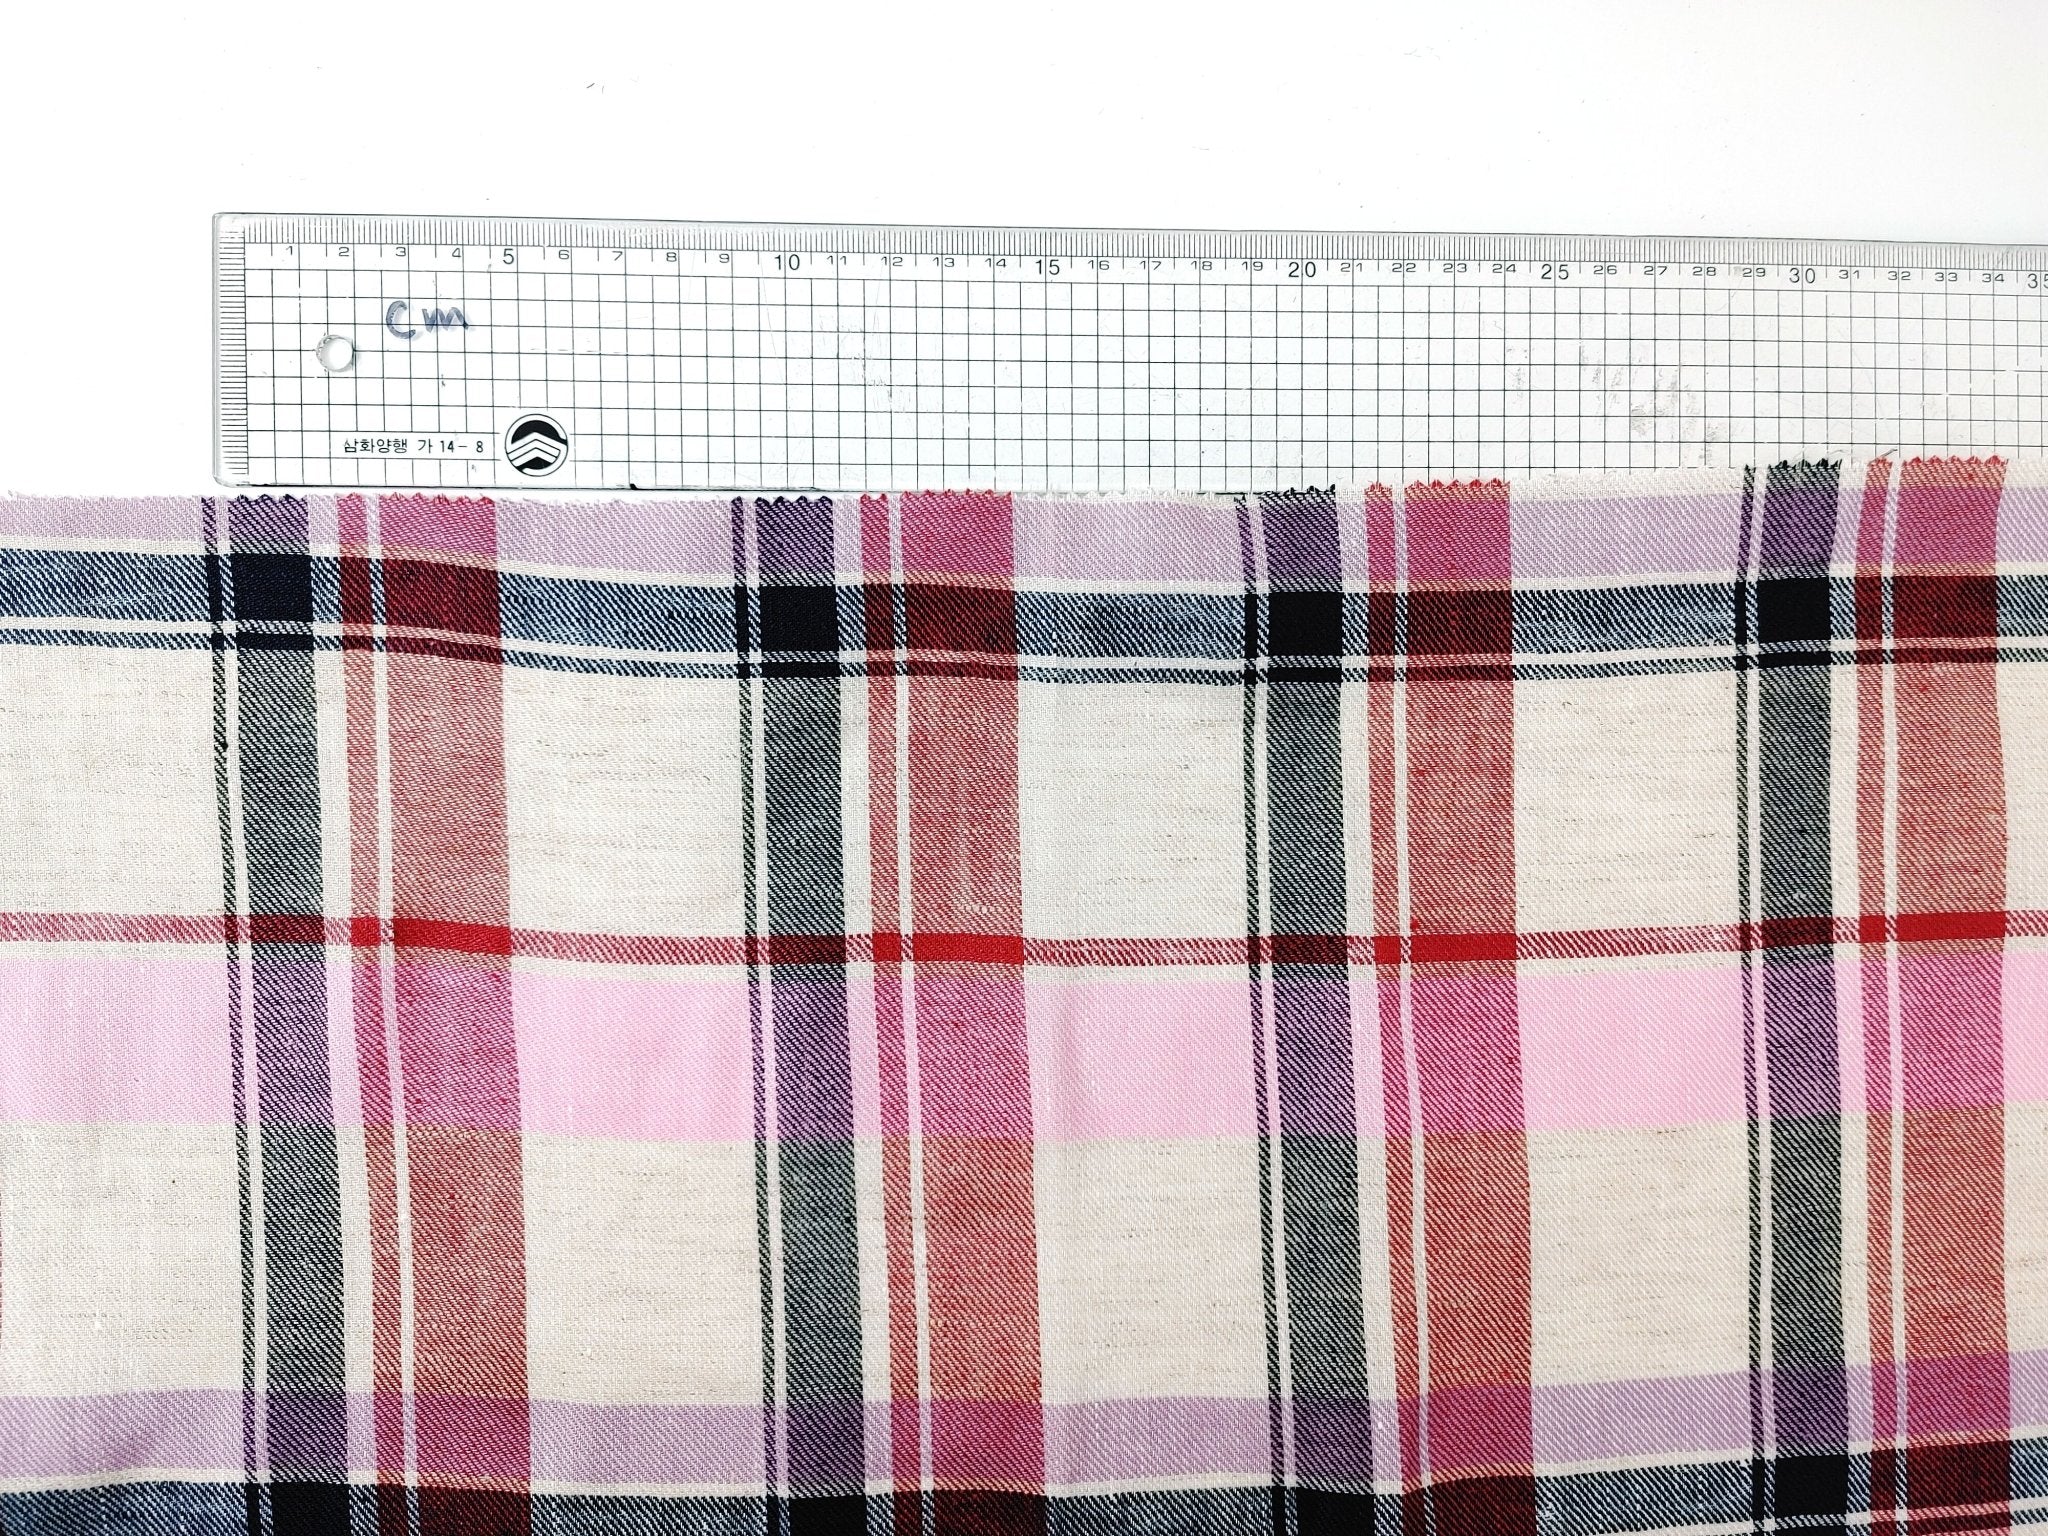 Rosy Check: Pink Linen Cotton Twill Plaid Fabric 4213 - The Linen Lab - Pink